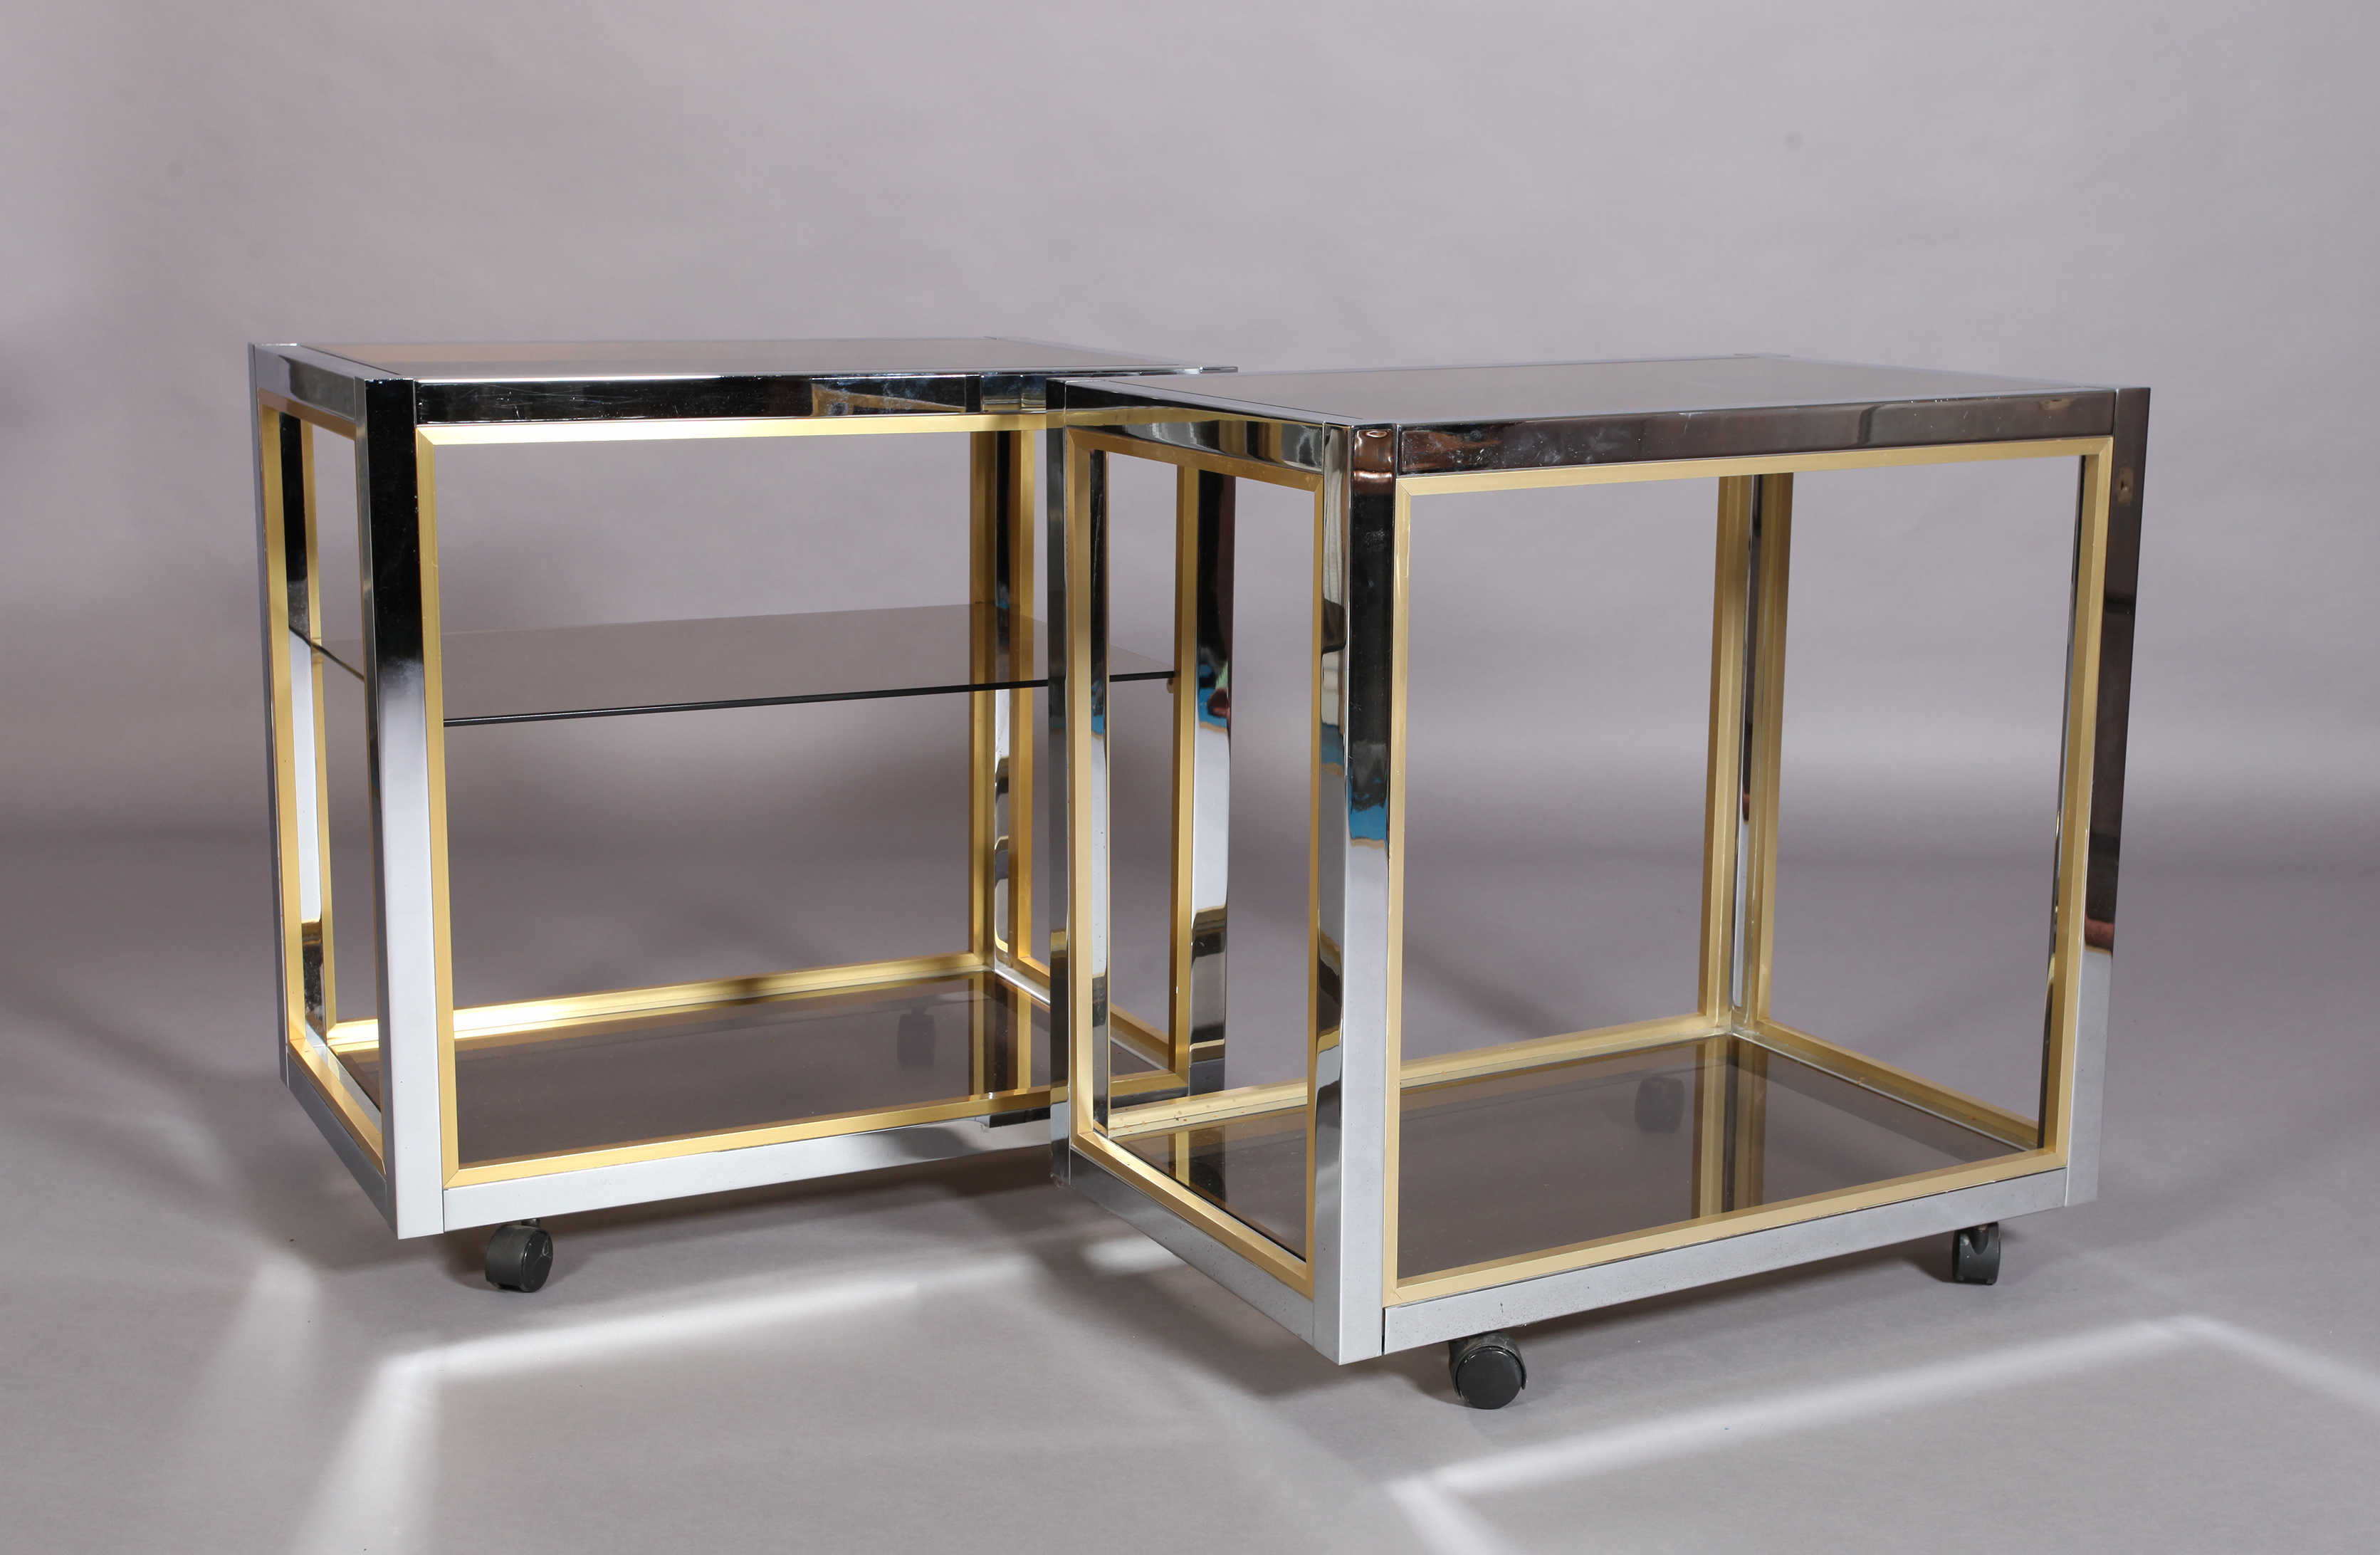 A pair of vintage brass and chromium plated drinks trolleys with smoked glass shelves, one with